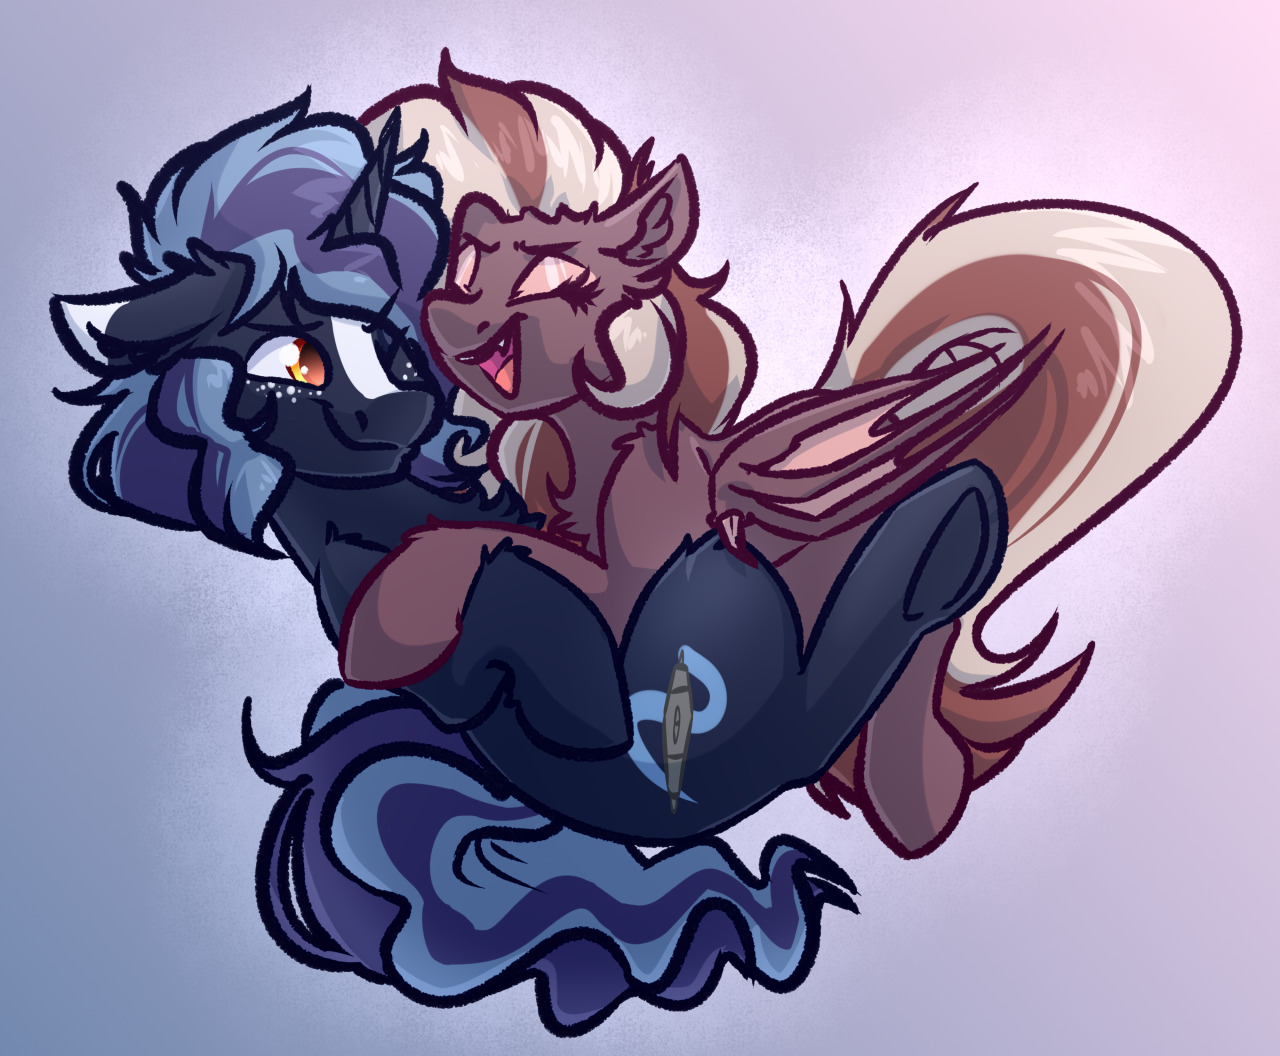 Witch and Lux having a good time in the amorphous gradient void. #pony#brony#commission#witchtaunter#mlp#mlpfim #my little pony #horse#effie#witch#witching hour#efflorescence